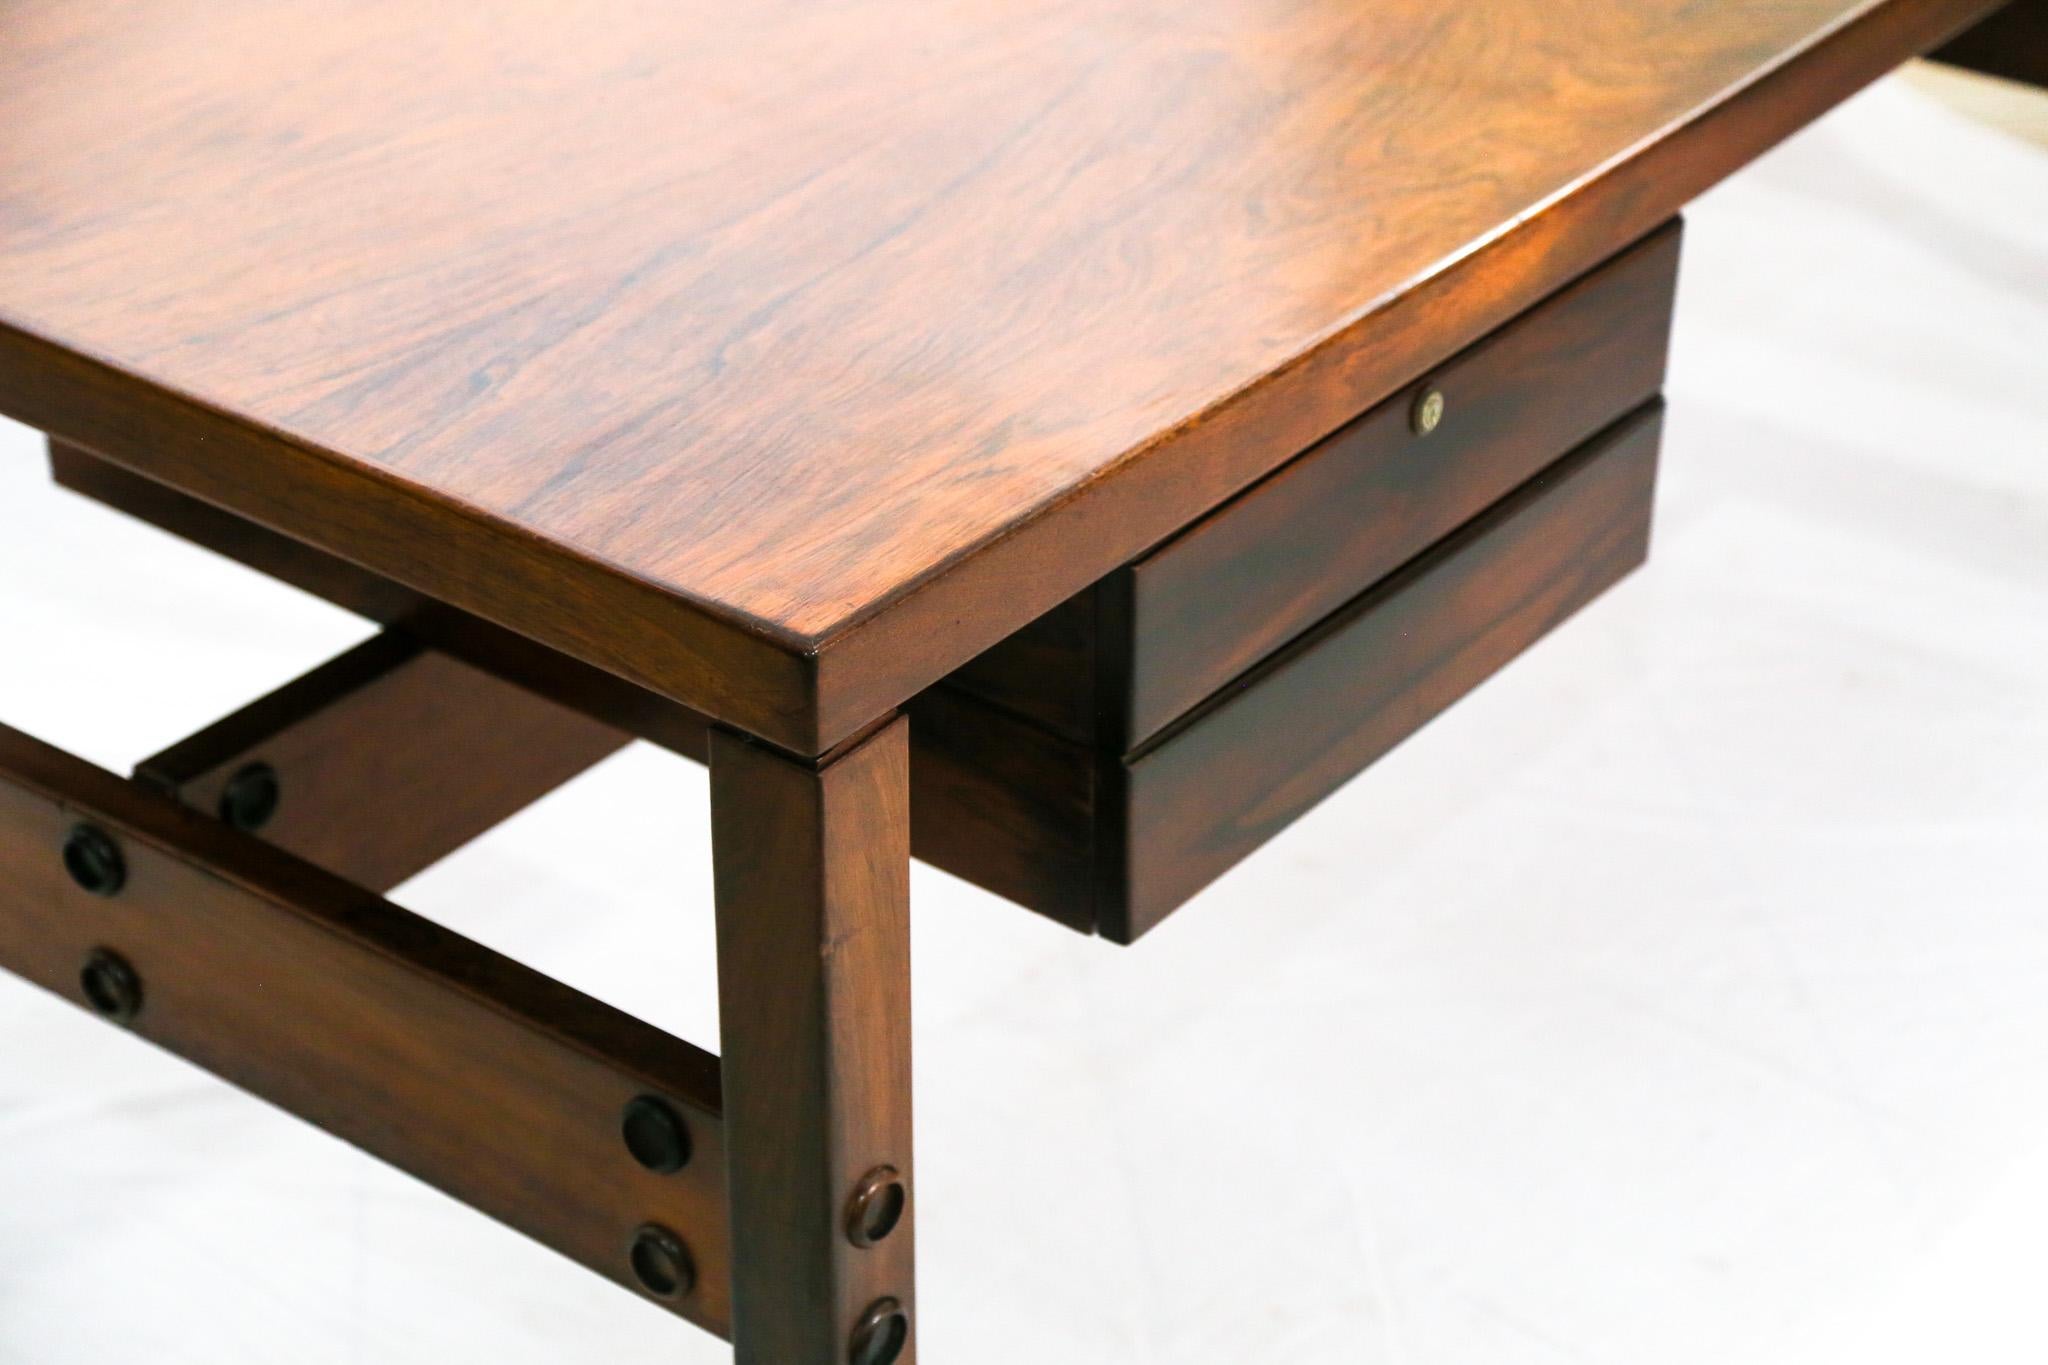 Brazilian Modern Desk in Hardwood with Floating Drawers, Sergio Rodrigues, 1960s For Sale 2